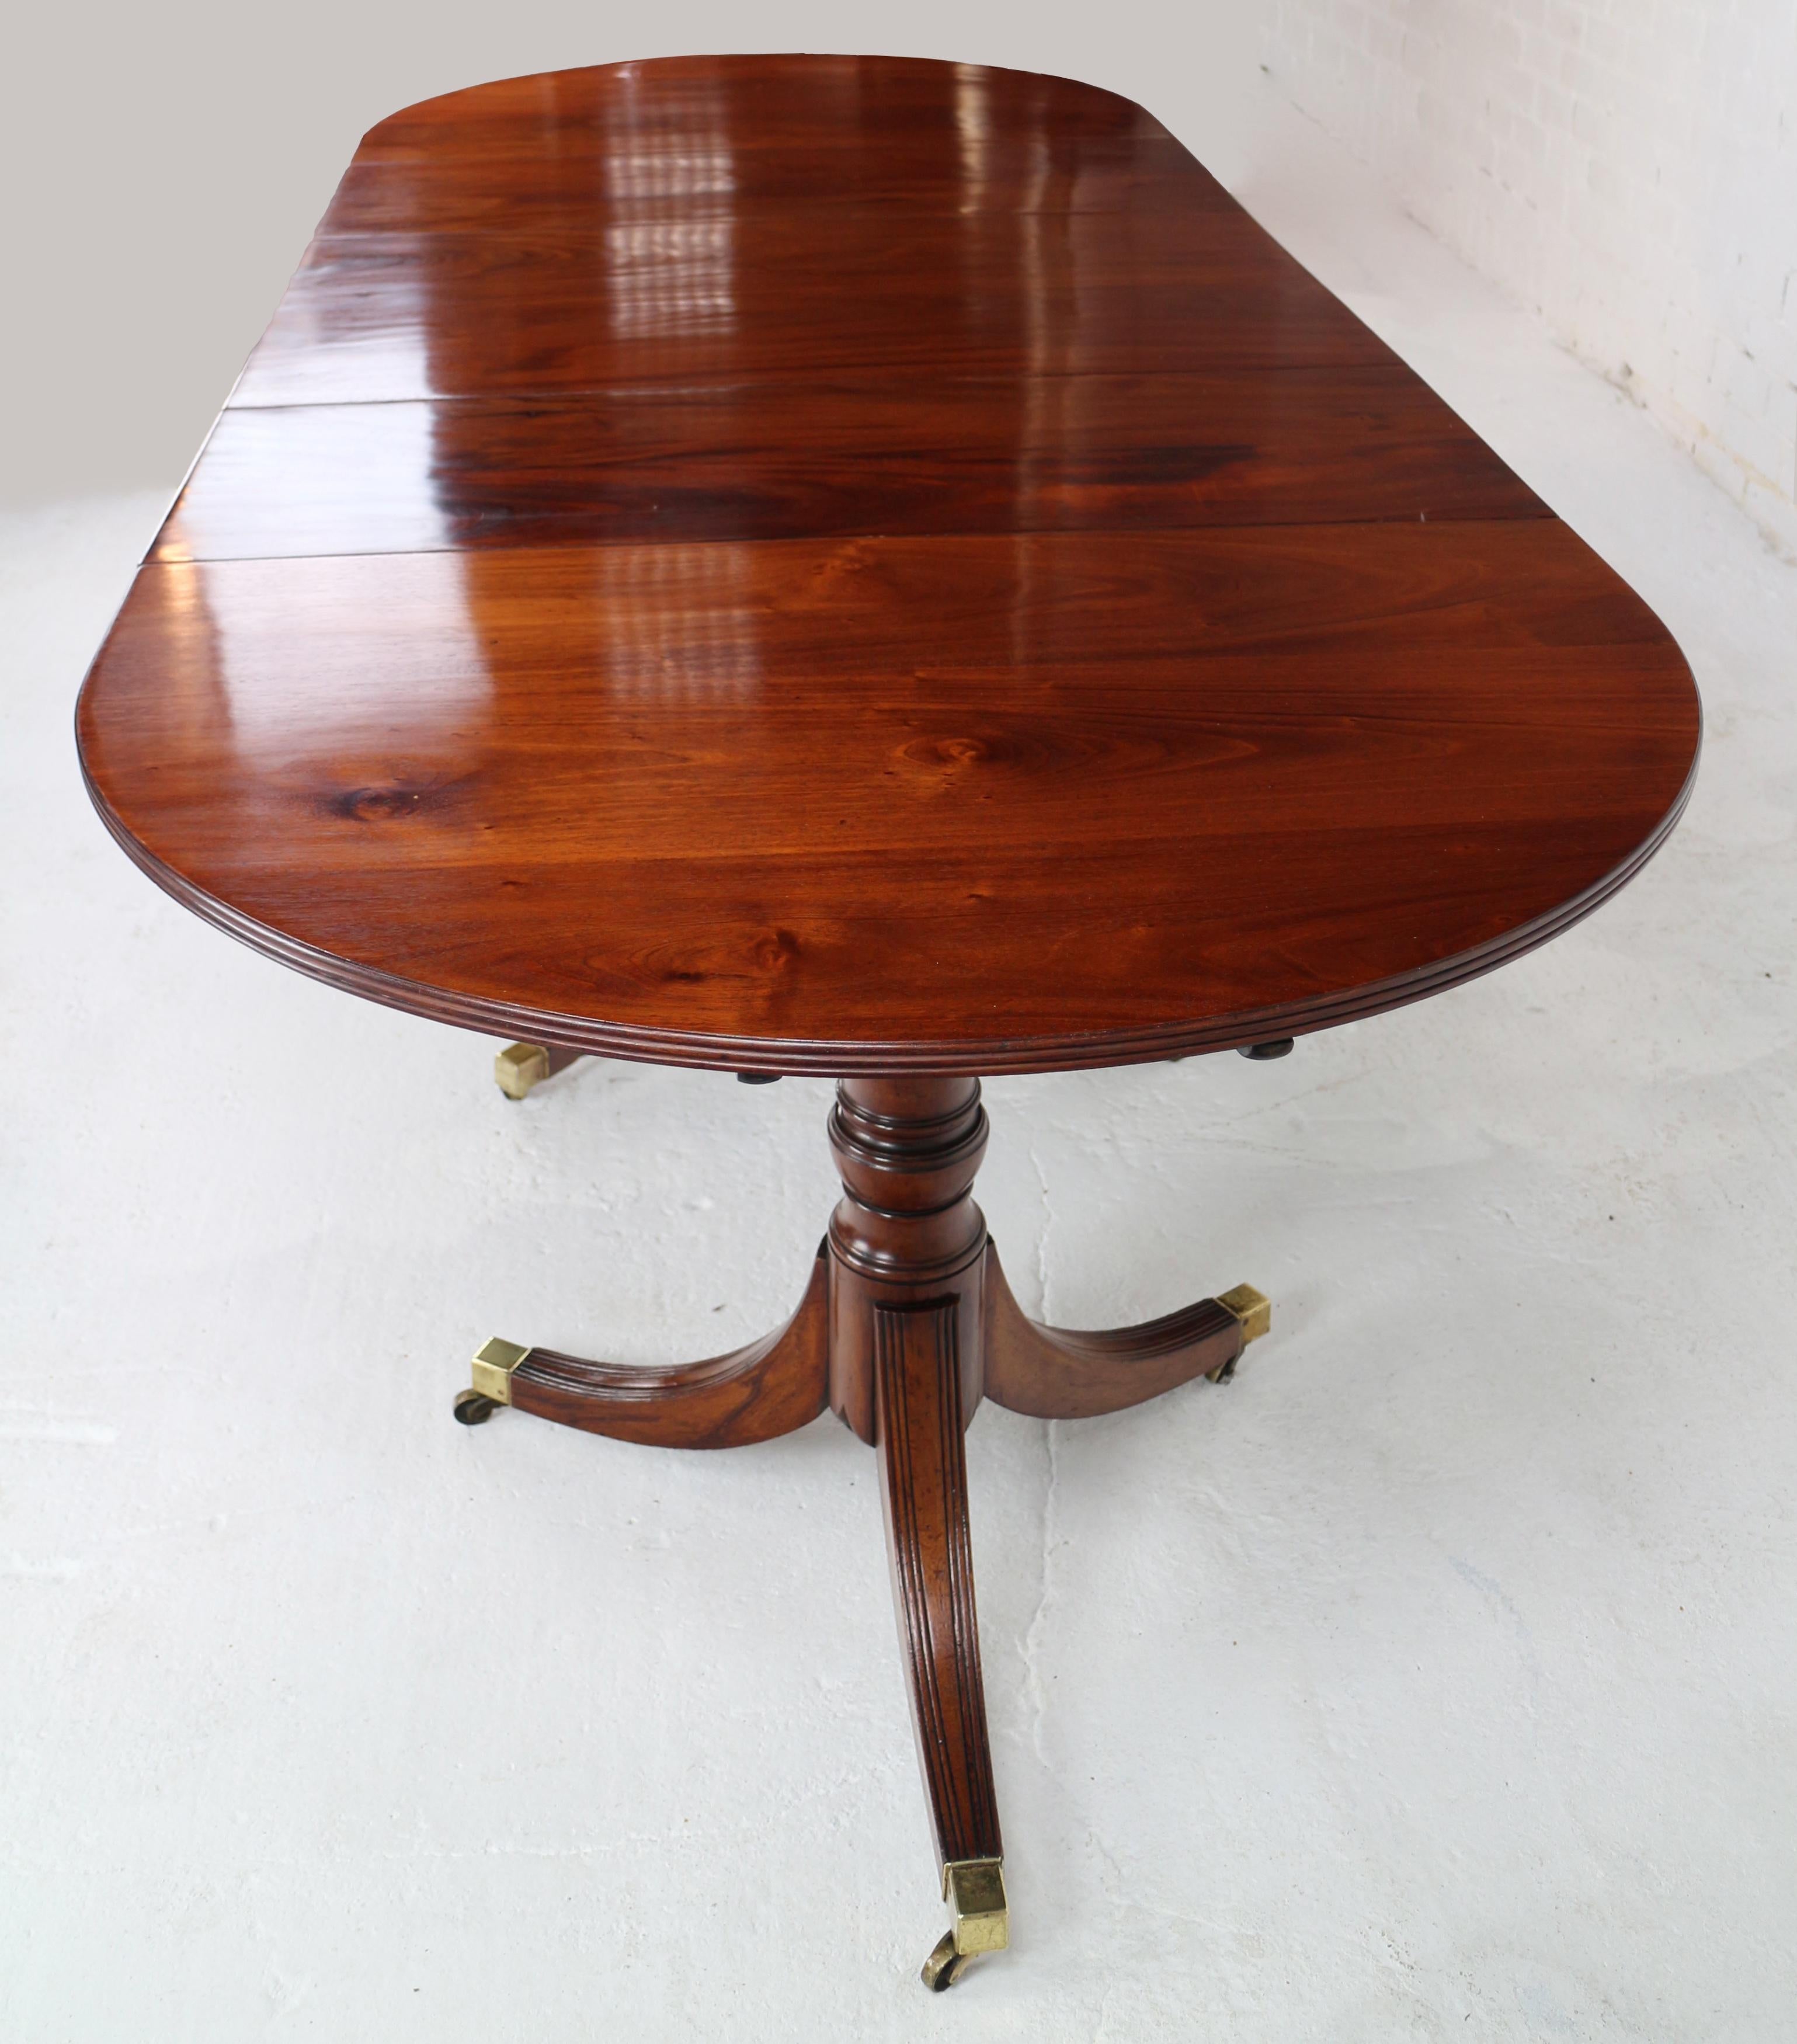 19th Century Antique English Regency Solid Mahogany Three Pillar Dining Table and 2 Leaves